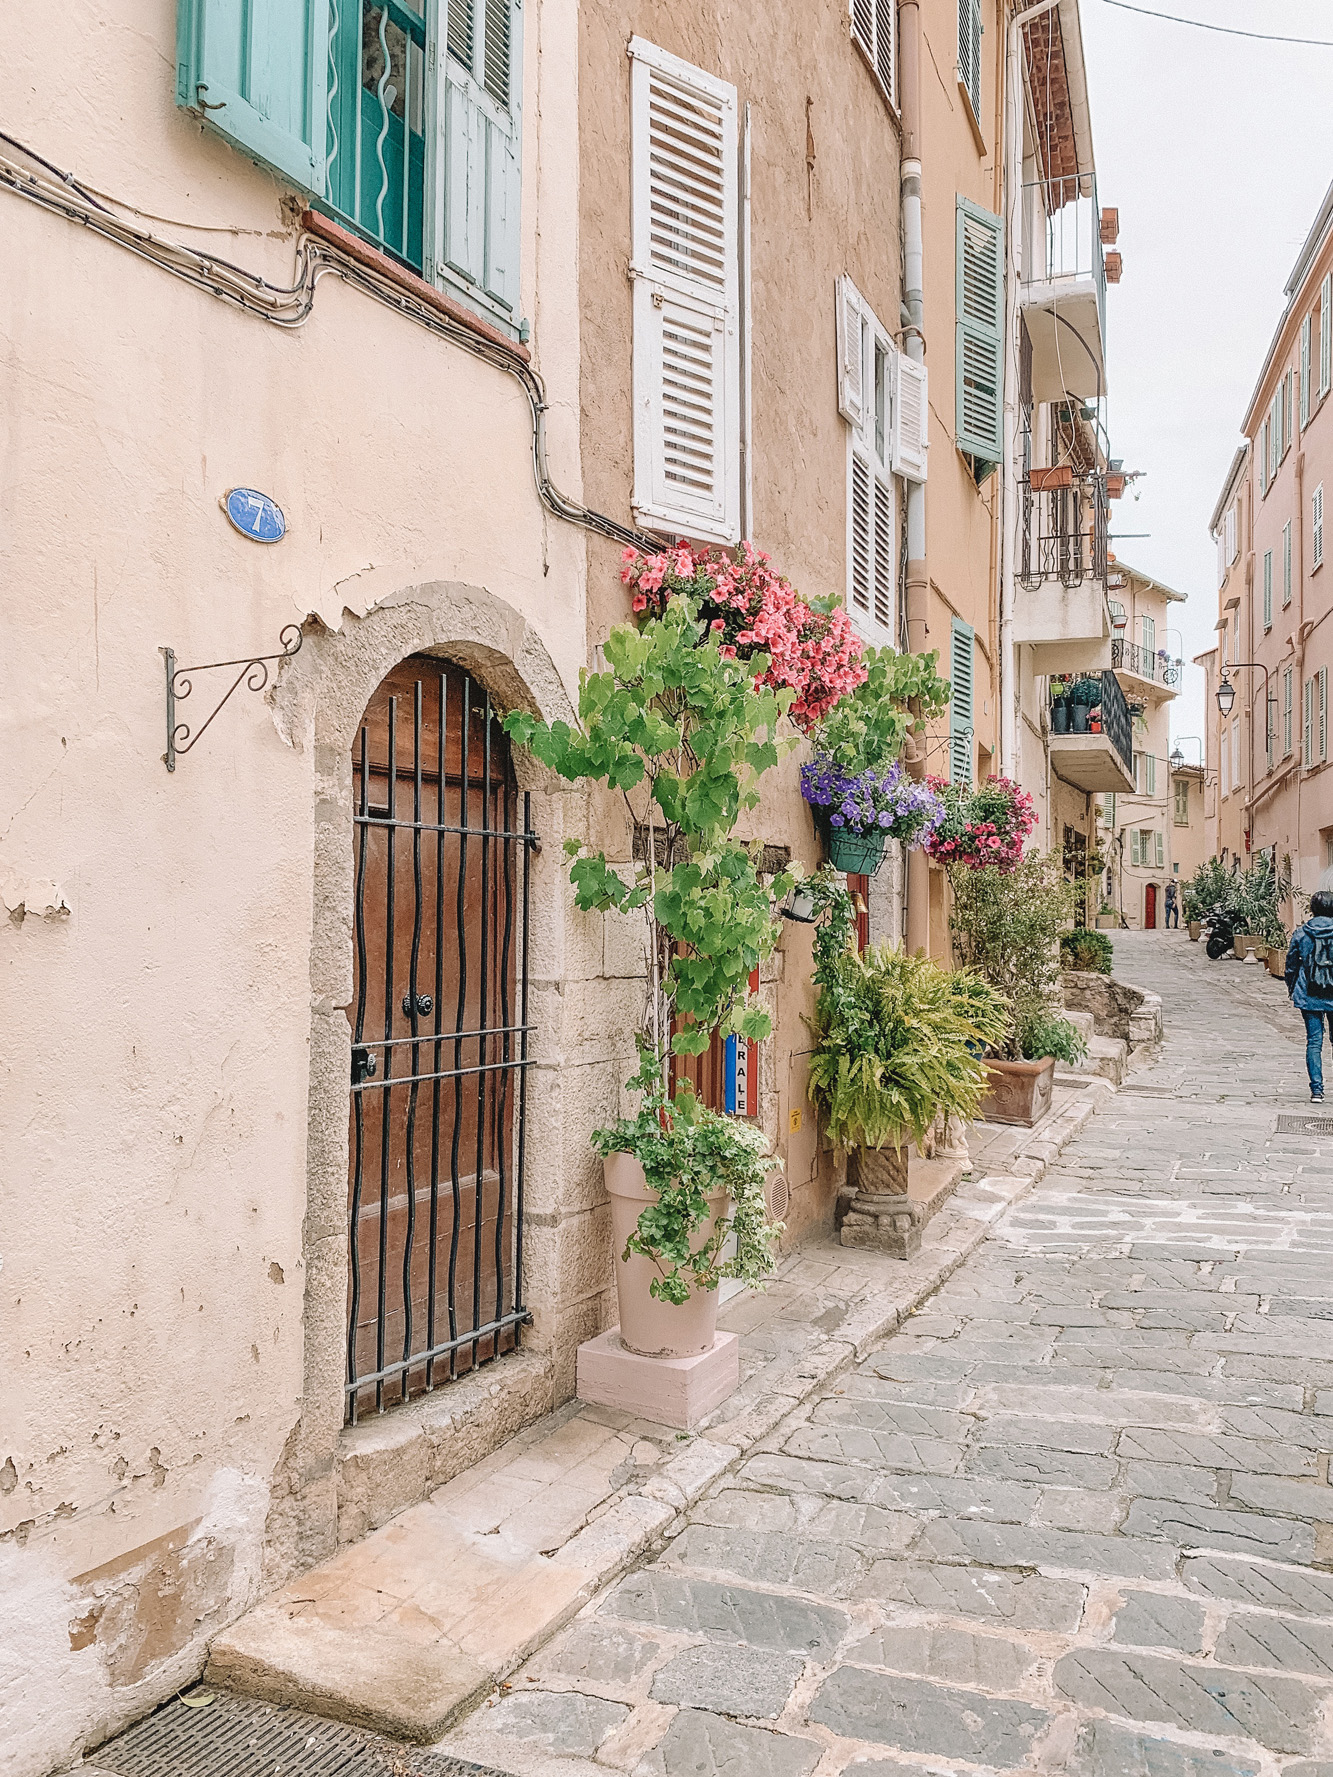 Mediterranean Cruise Travel Guide - From Barcelona to Rome | Windstar Cruise Review | Kristy Wicks